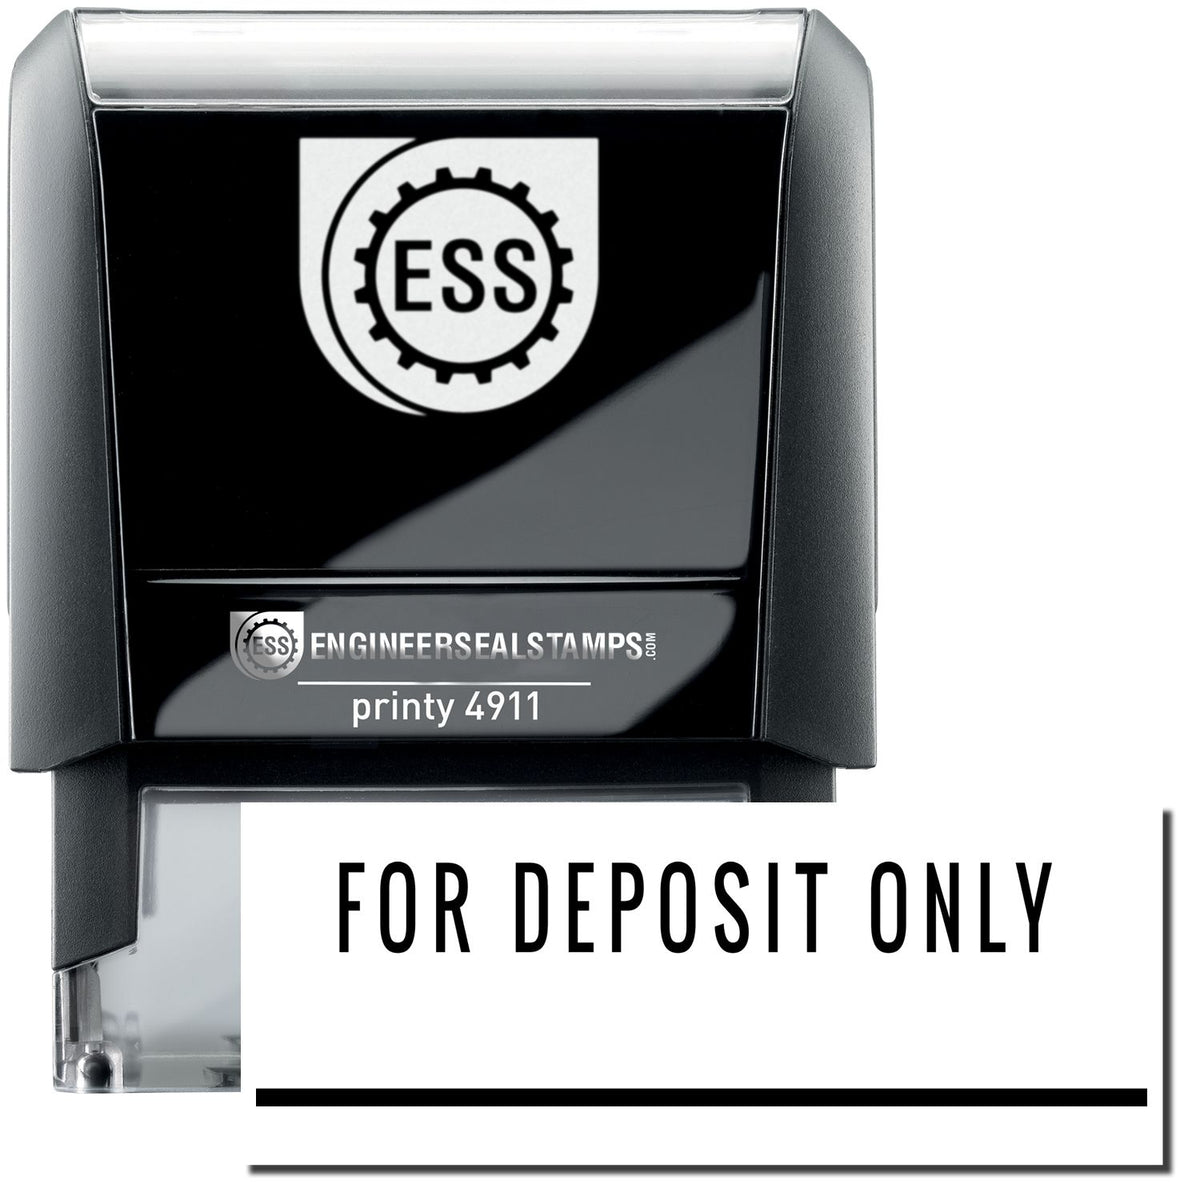 A self-inking stamp with a stamped image showing how the text &quot;FOR DEPOSIT ONLY&quot; with a line below the text is displayed after stamping.